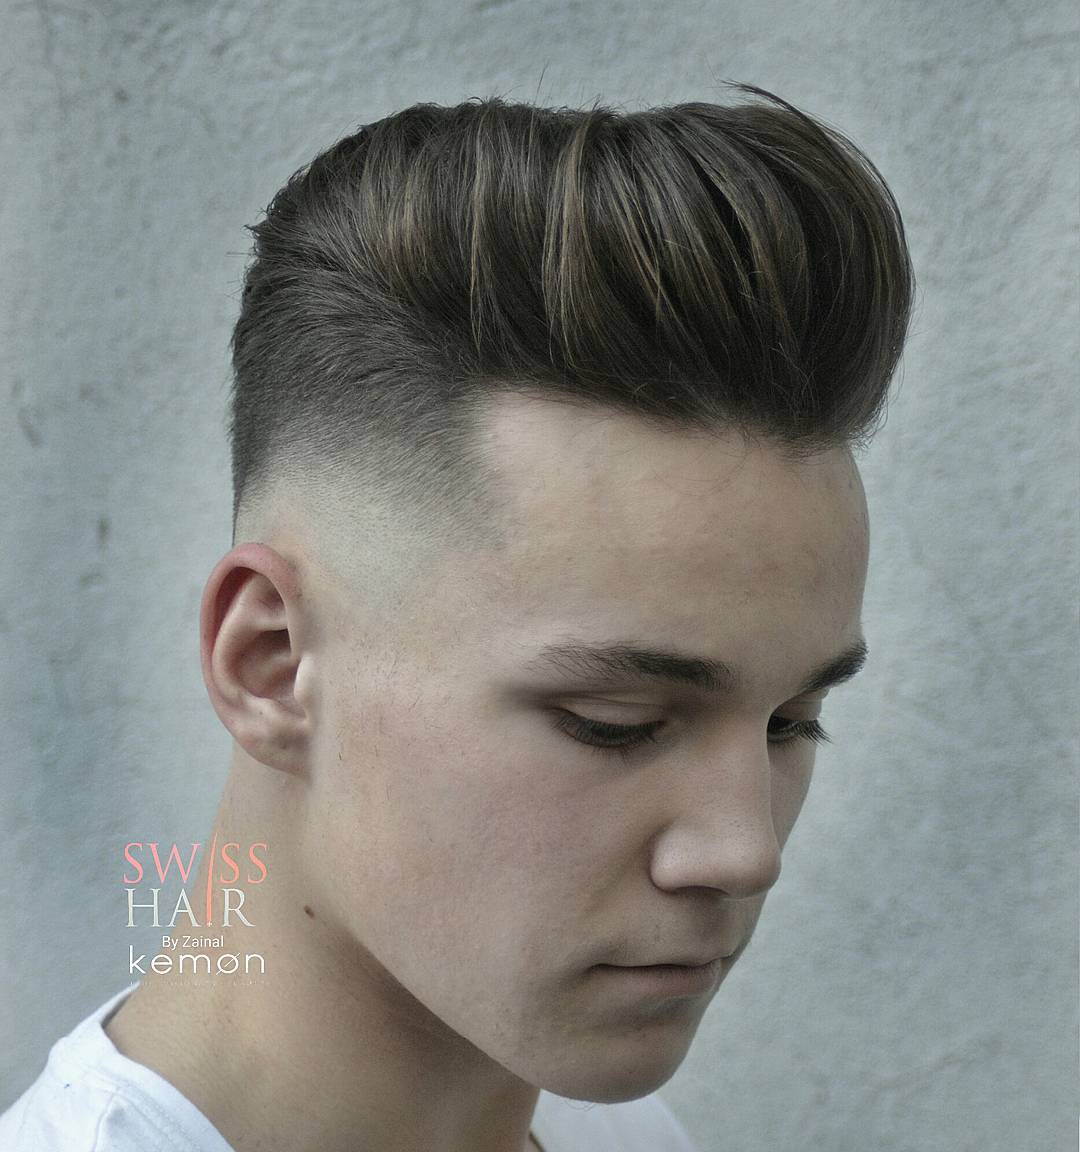 Thick hair pompadour hairstyle for men